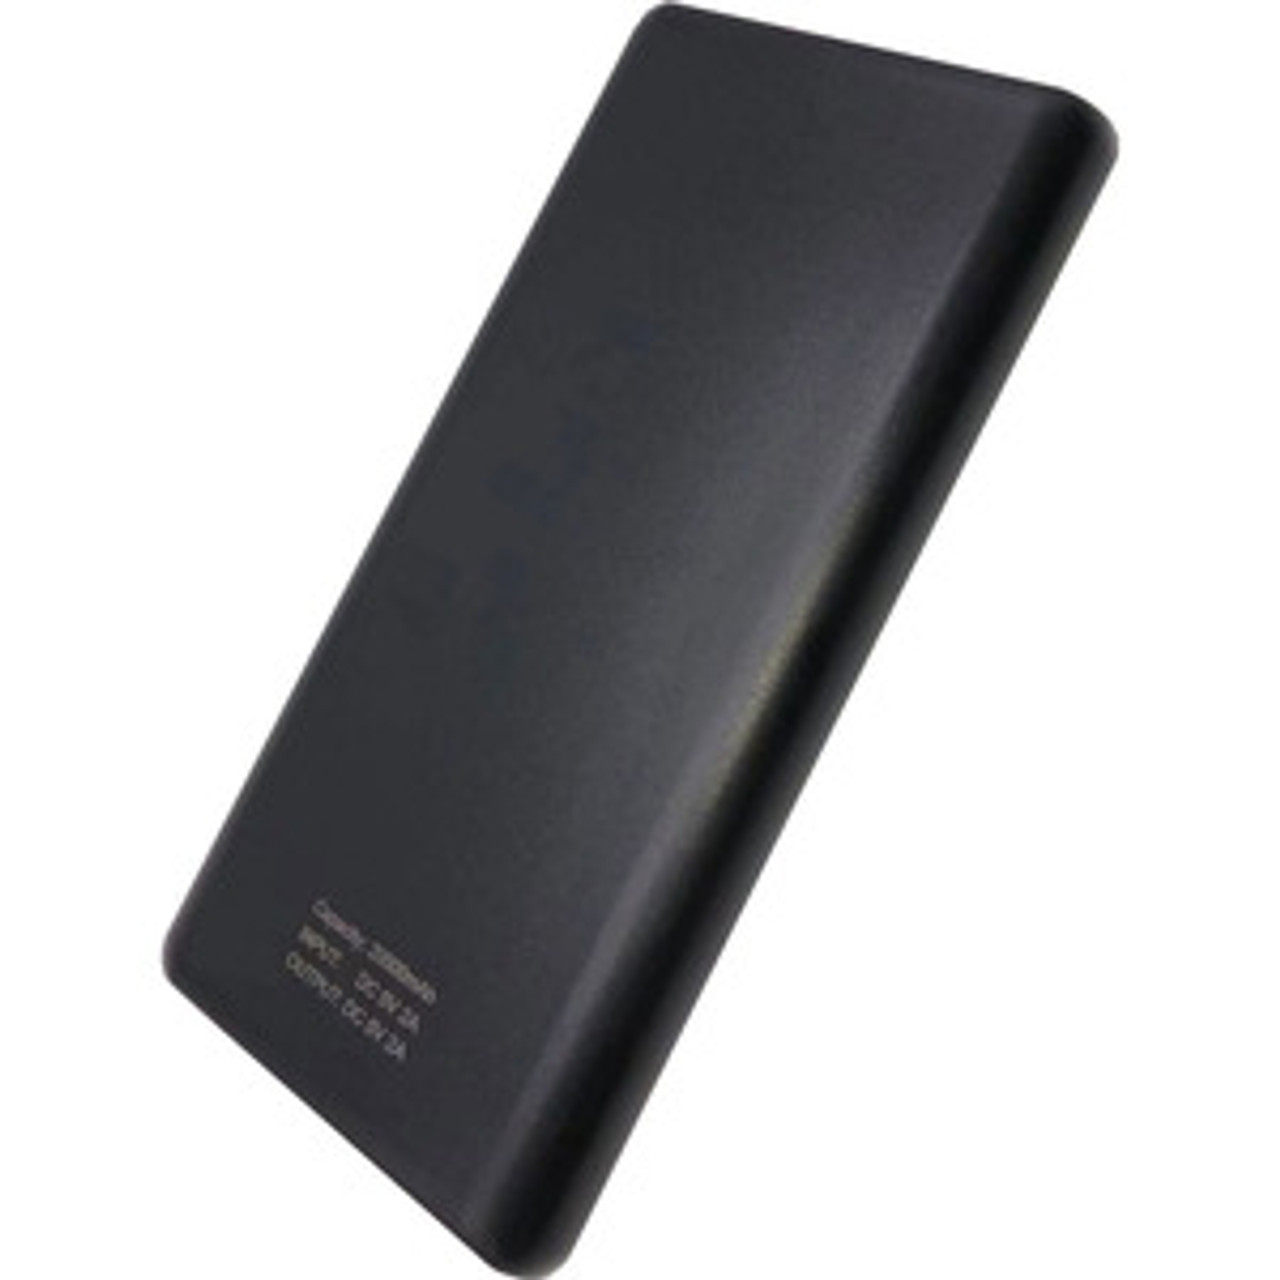 4XEM Fast Charging Power Bank with a 20000mAh Capacity